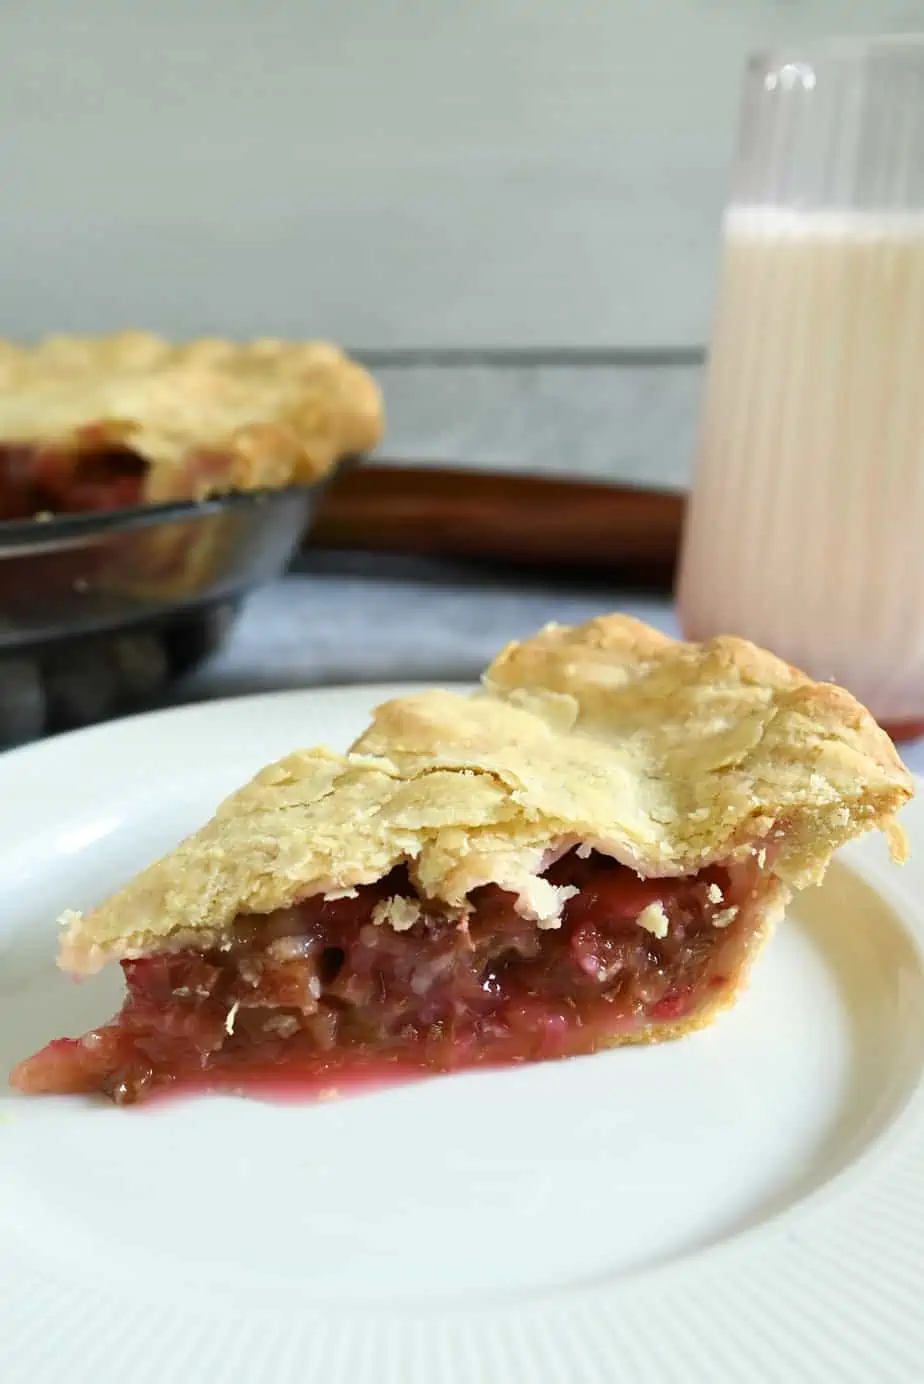 Slice of rhubarb pie on a white plate.